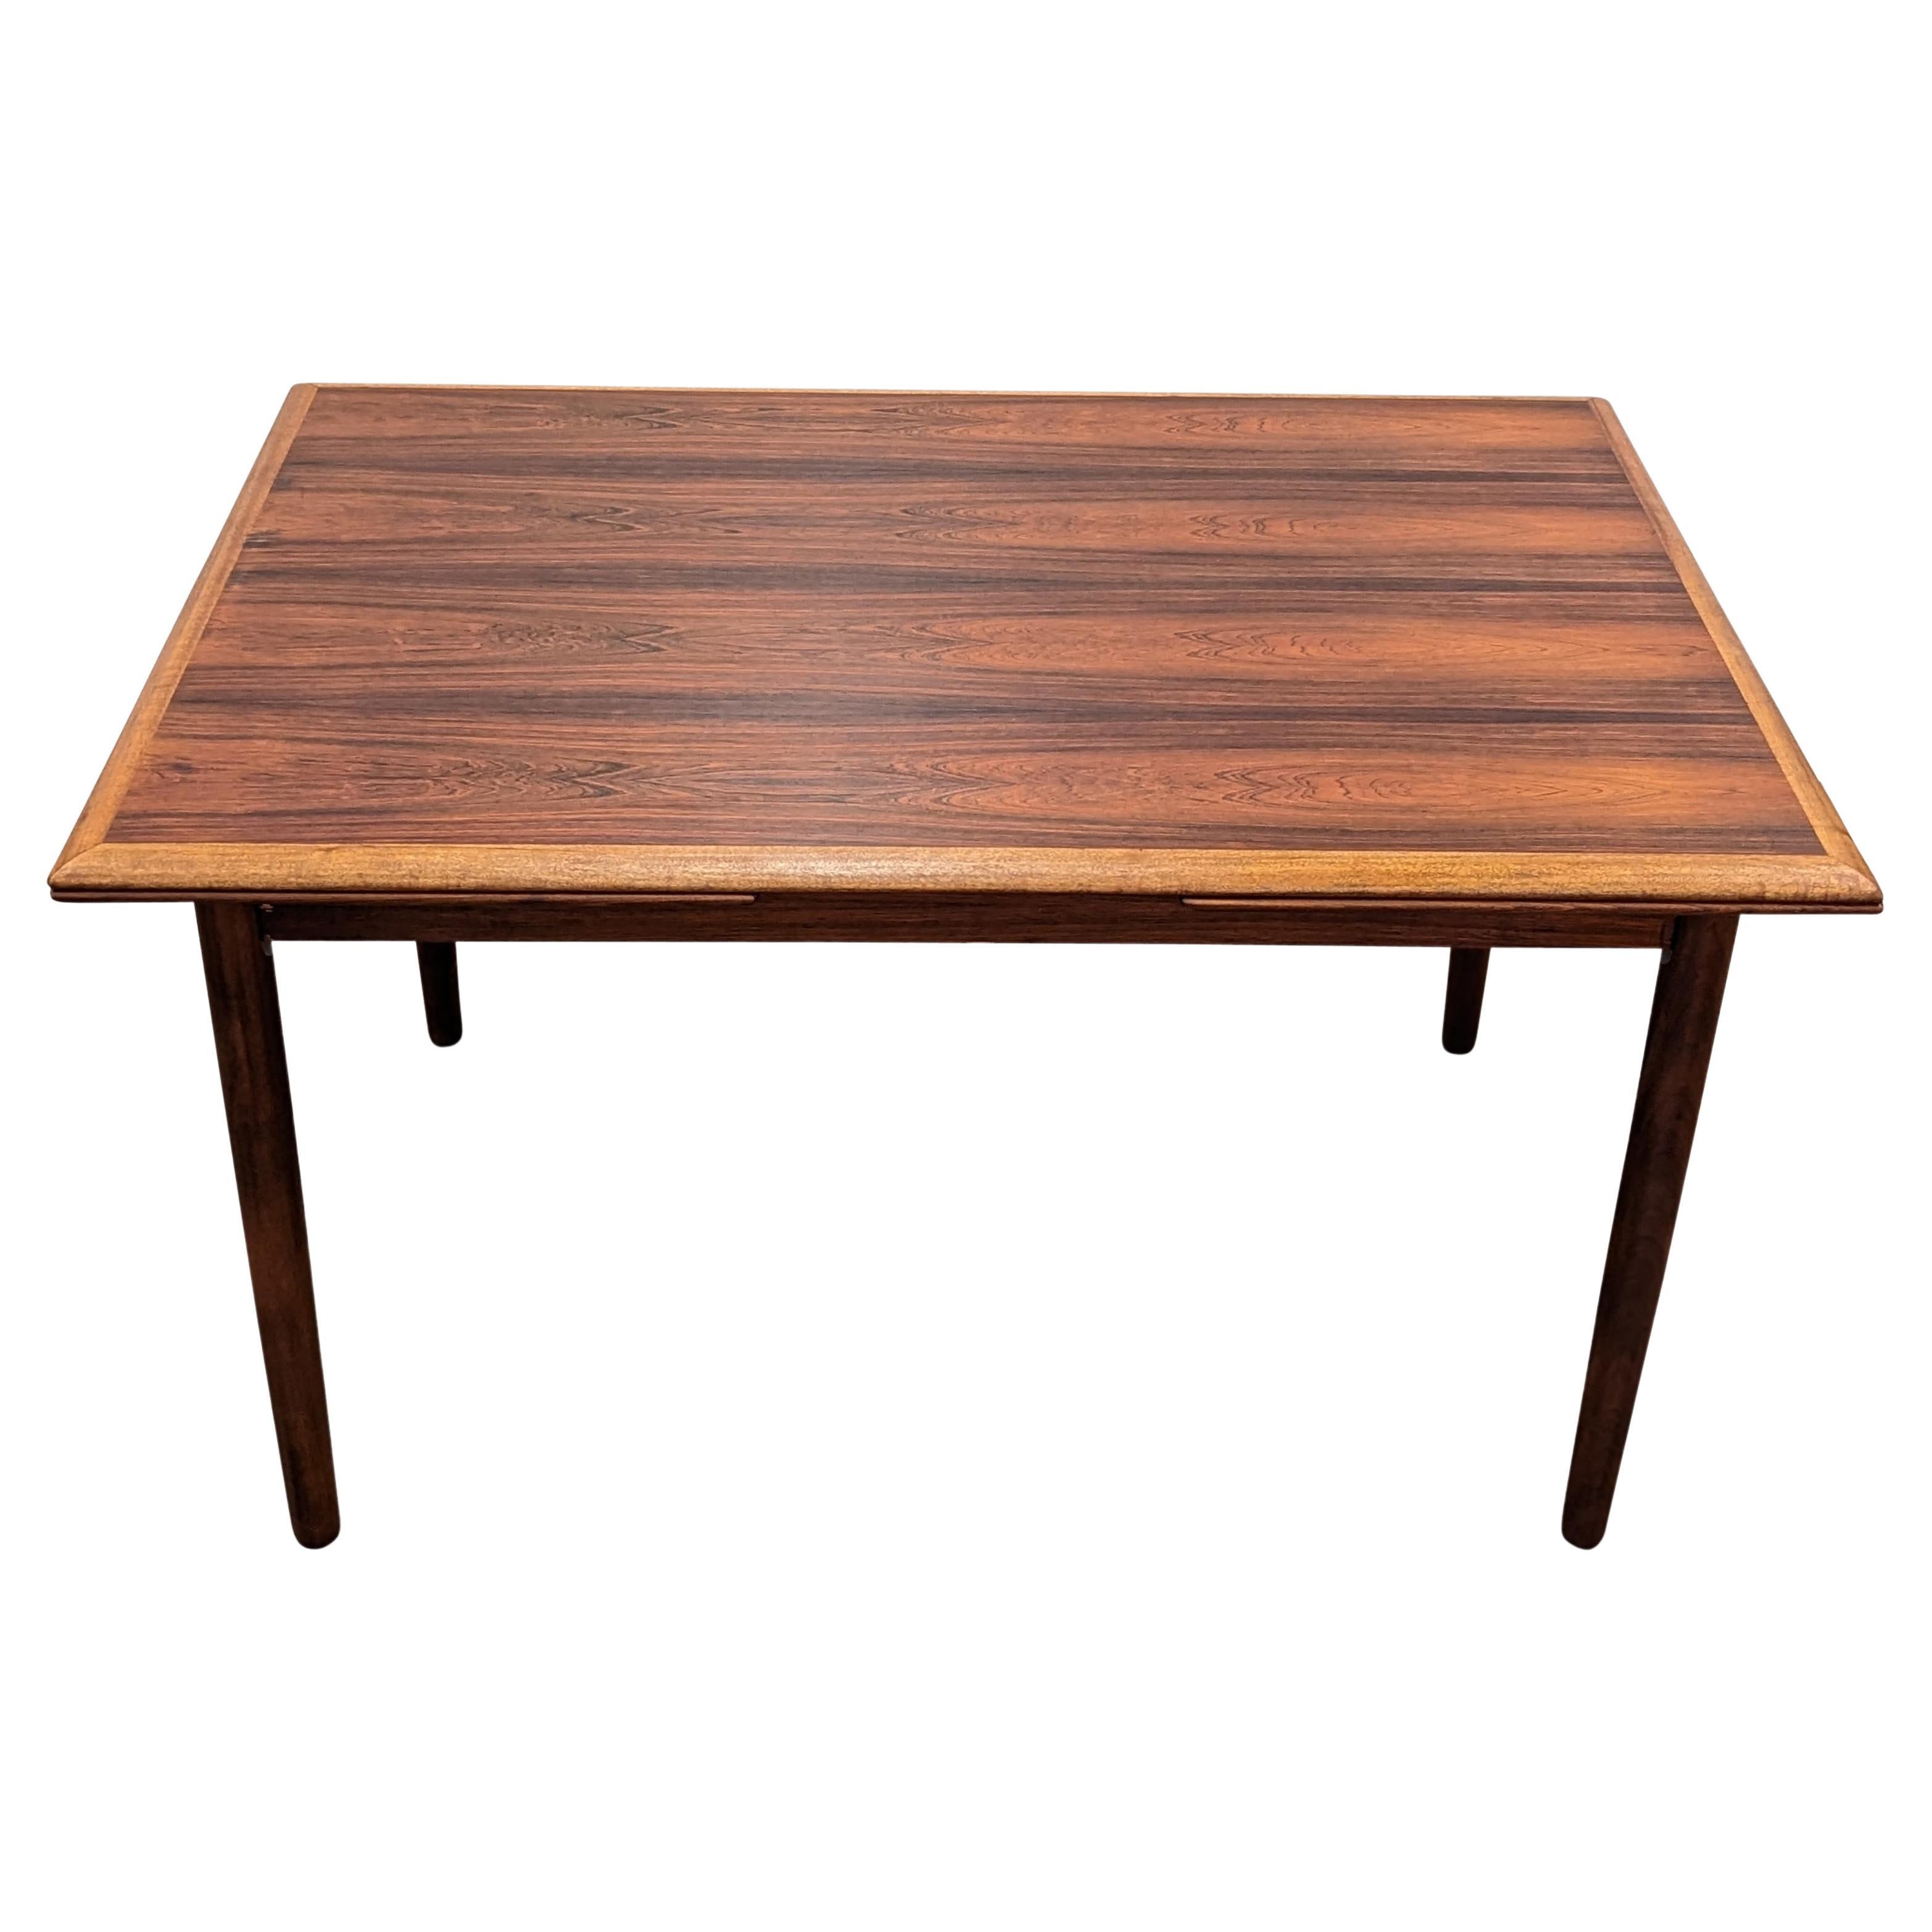 Vintage Danish Rosewood Dining Table W Two Leaves, 112209